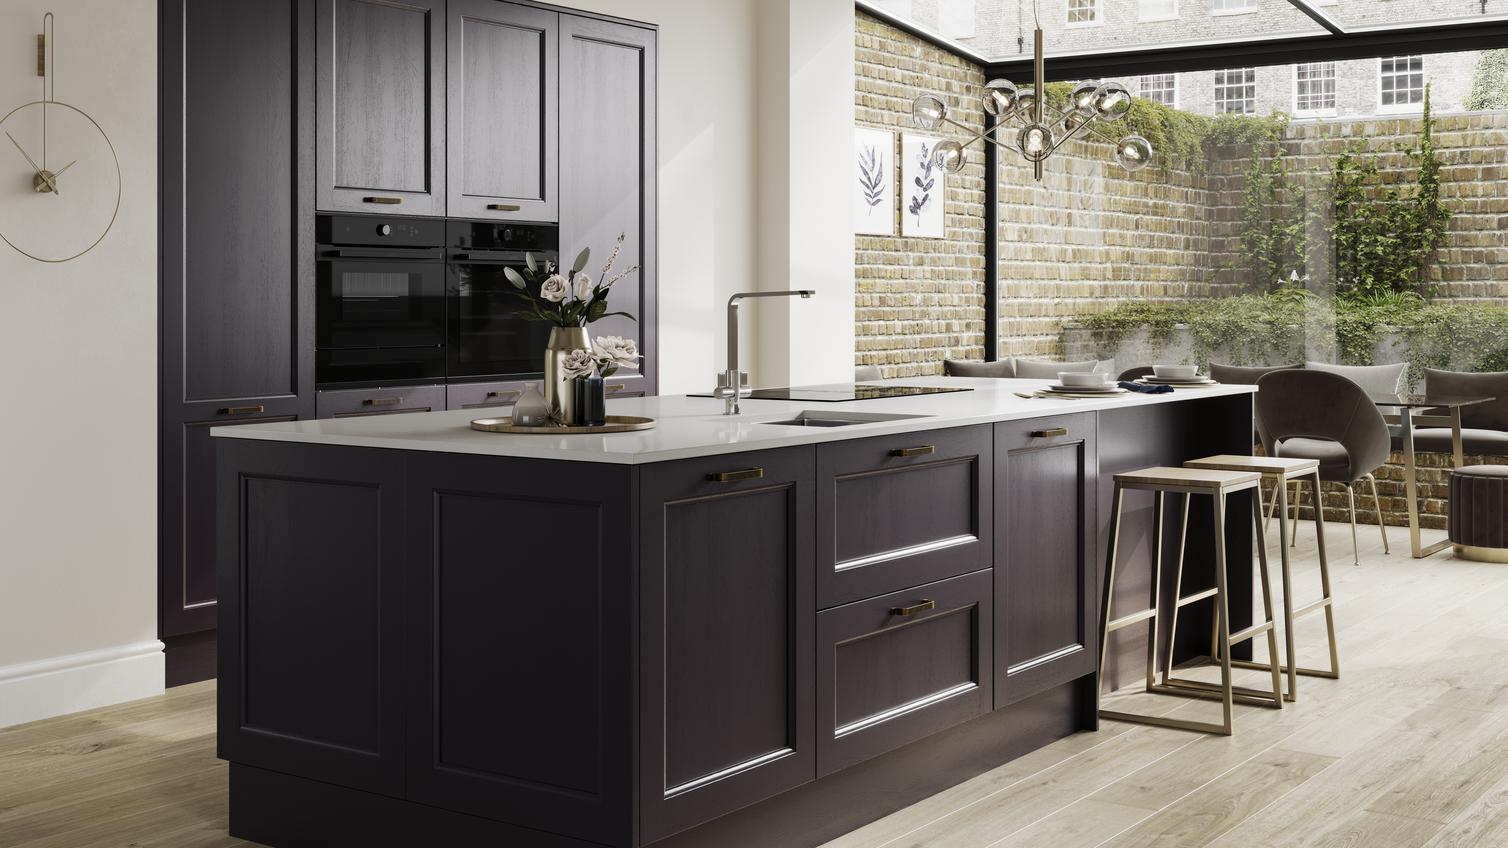 A blackberry purple shaker kitchen in an island layout. It has integrated appliances, a white worktop and brass accessories.